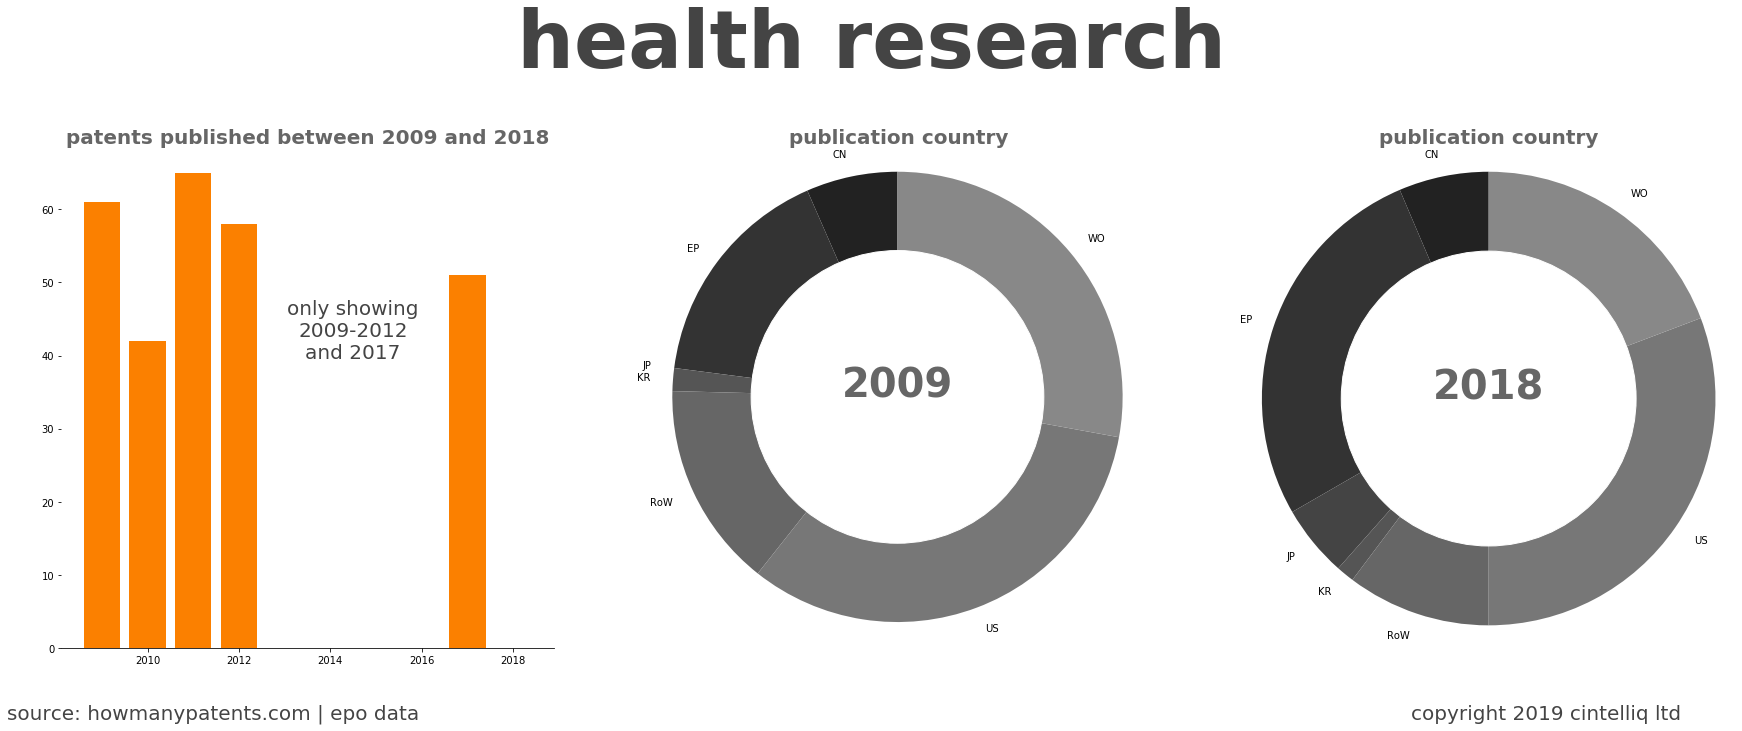 summary of patents for Health Research